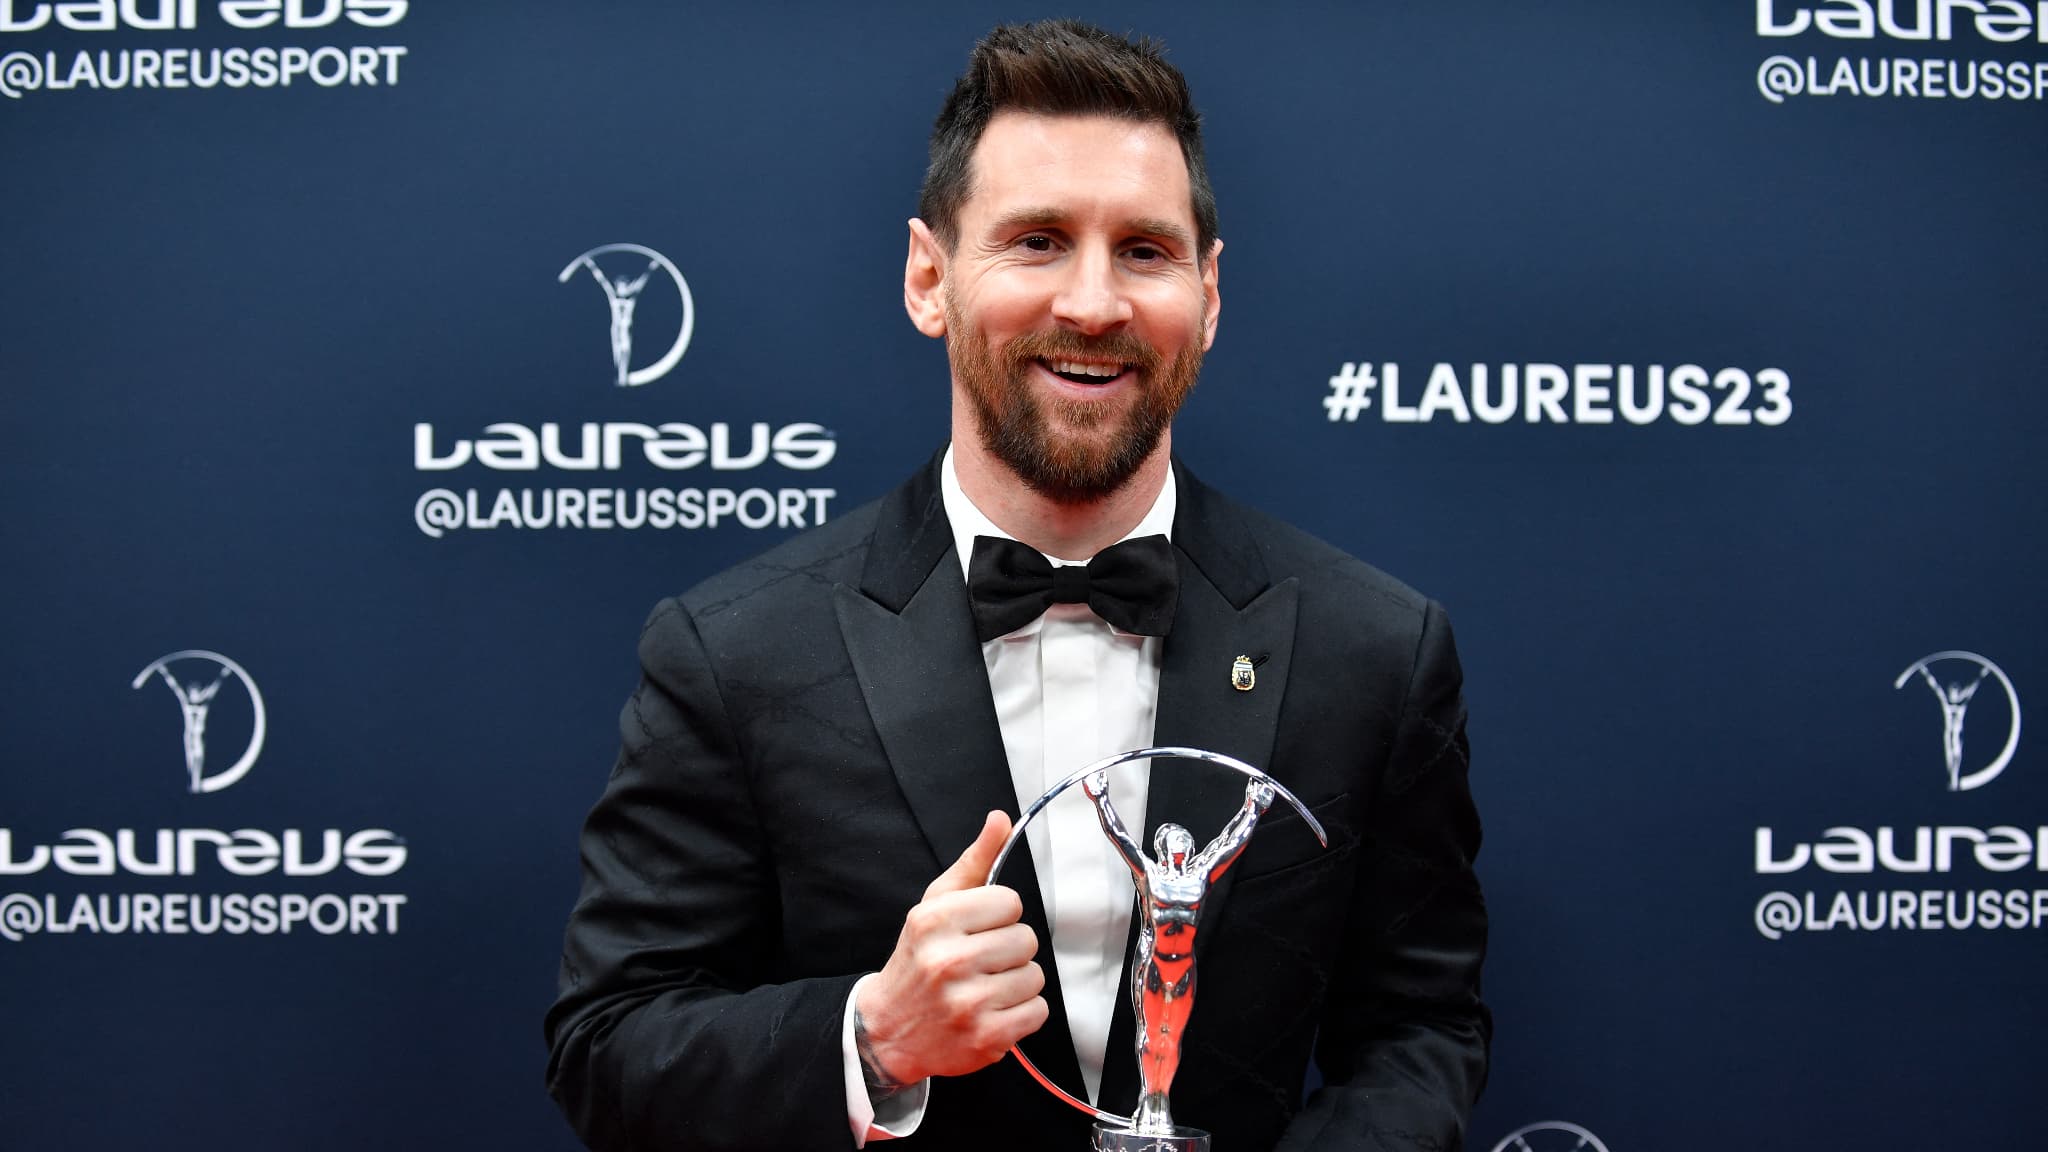 Lionel Messi first athlete to win two prizes at Laureus World